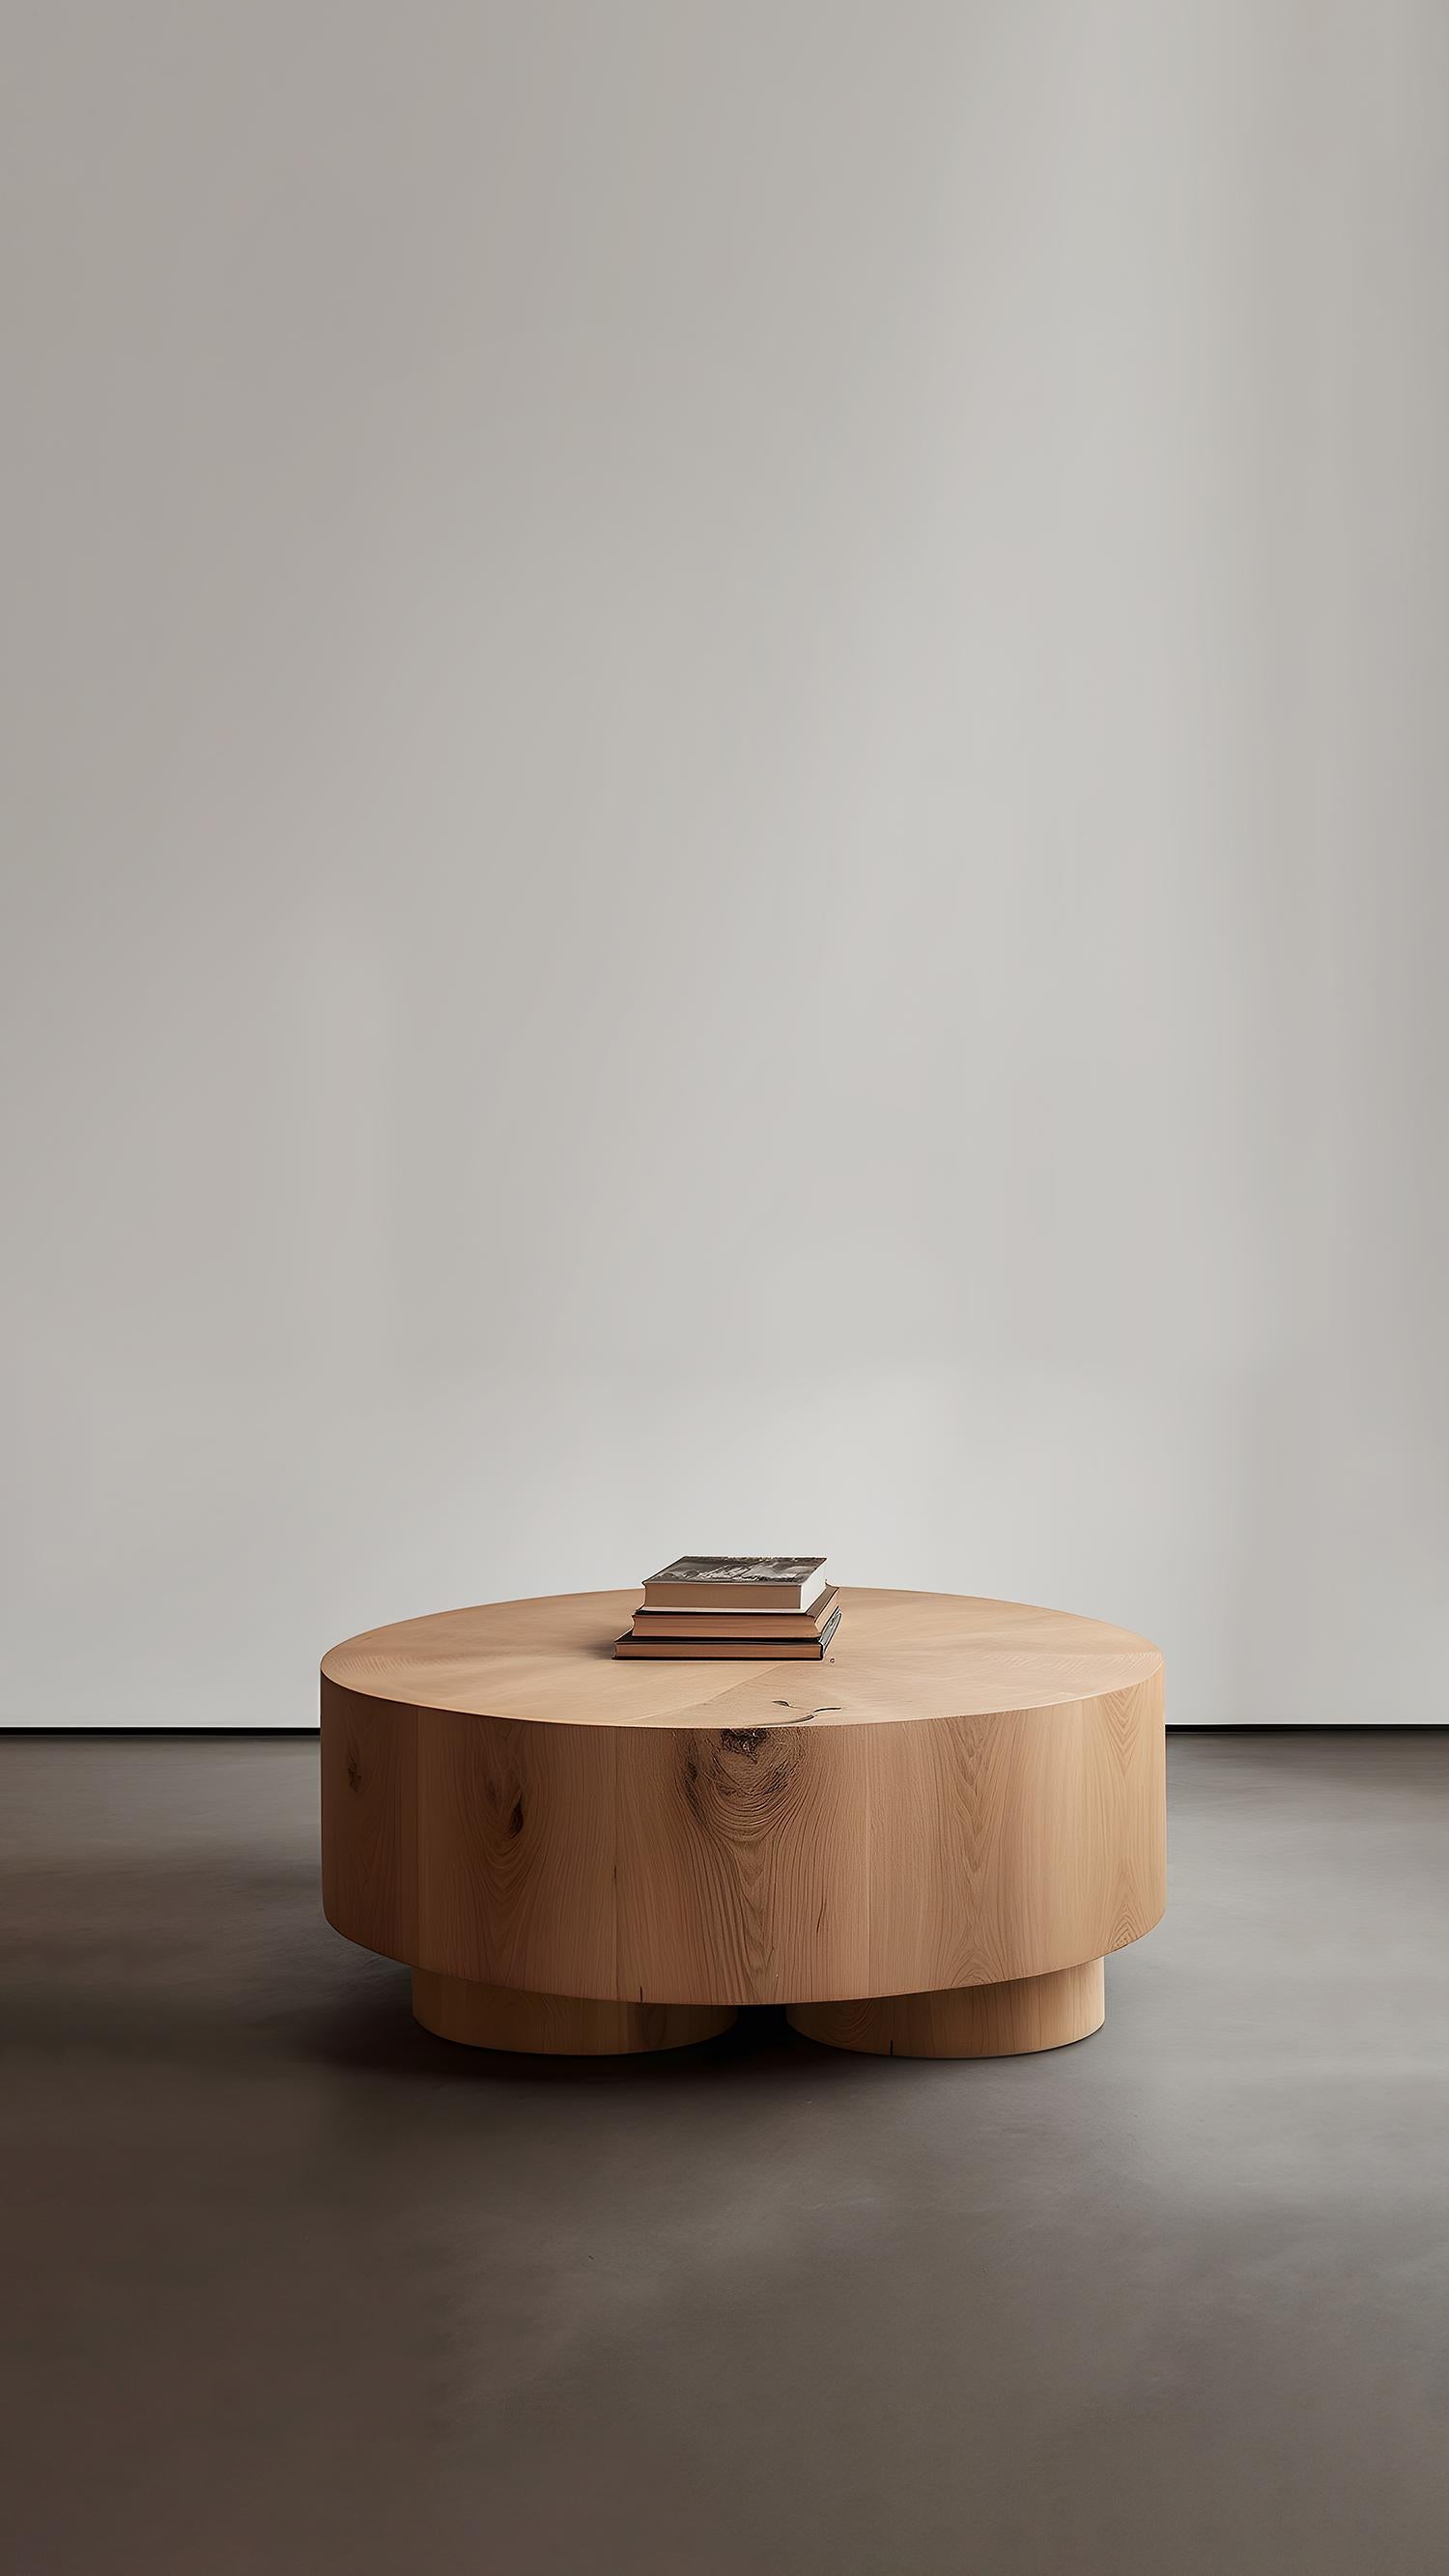 Contemporary Brutalist Round Coffee Table in Red Oak Wood Veneer, Podio by NONO